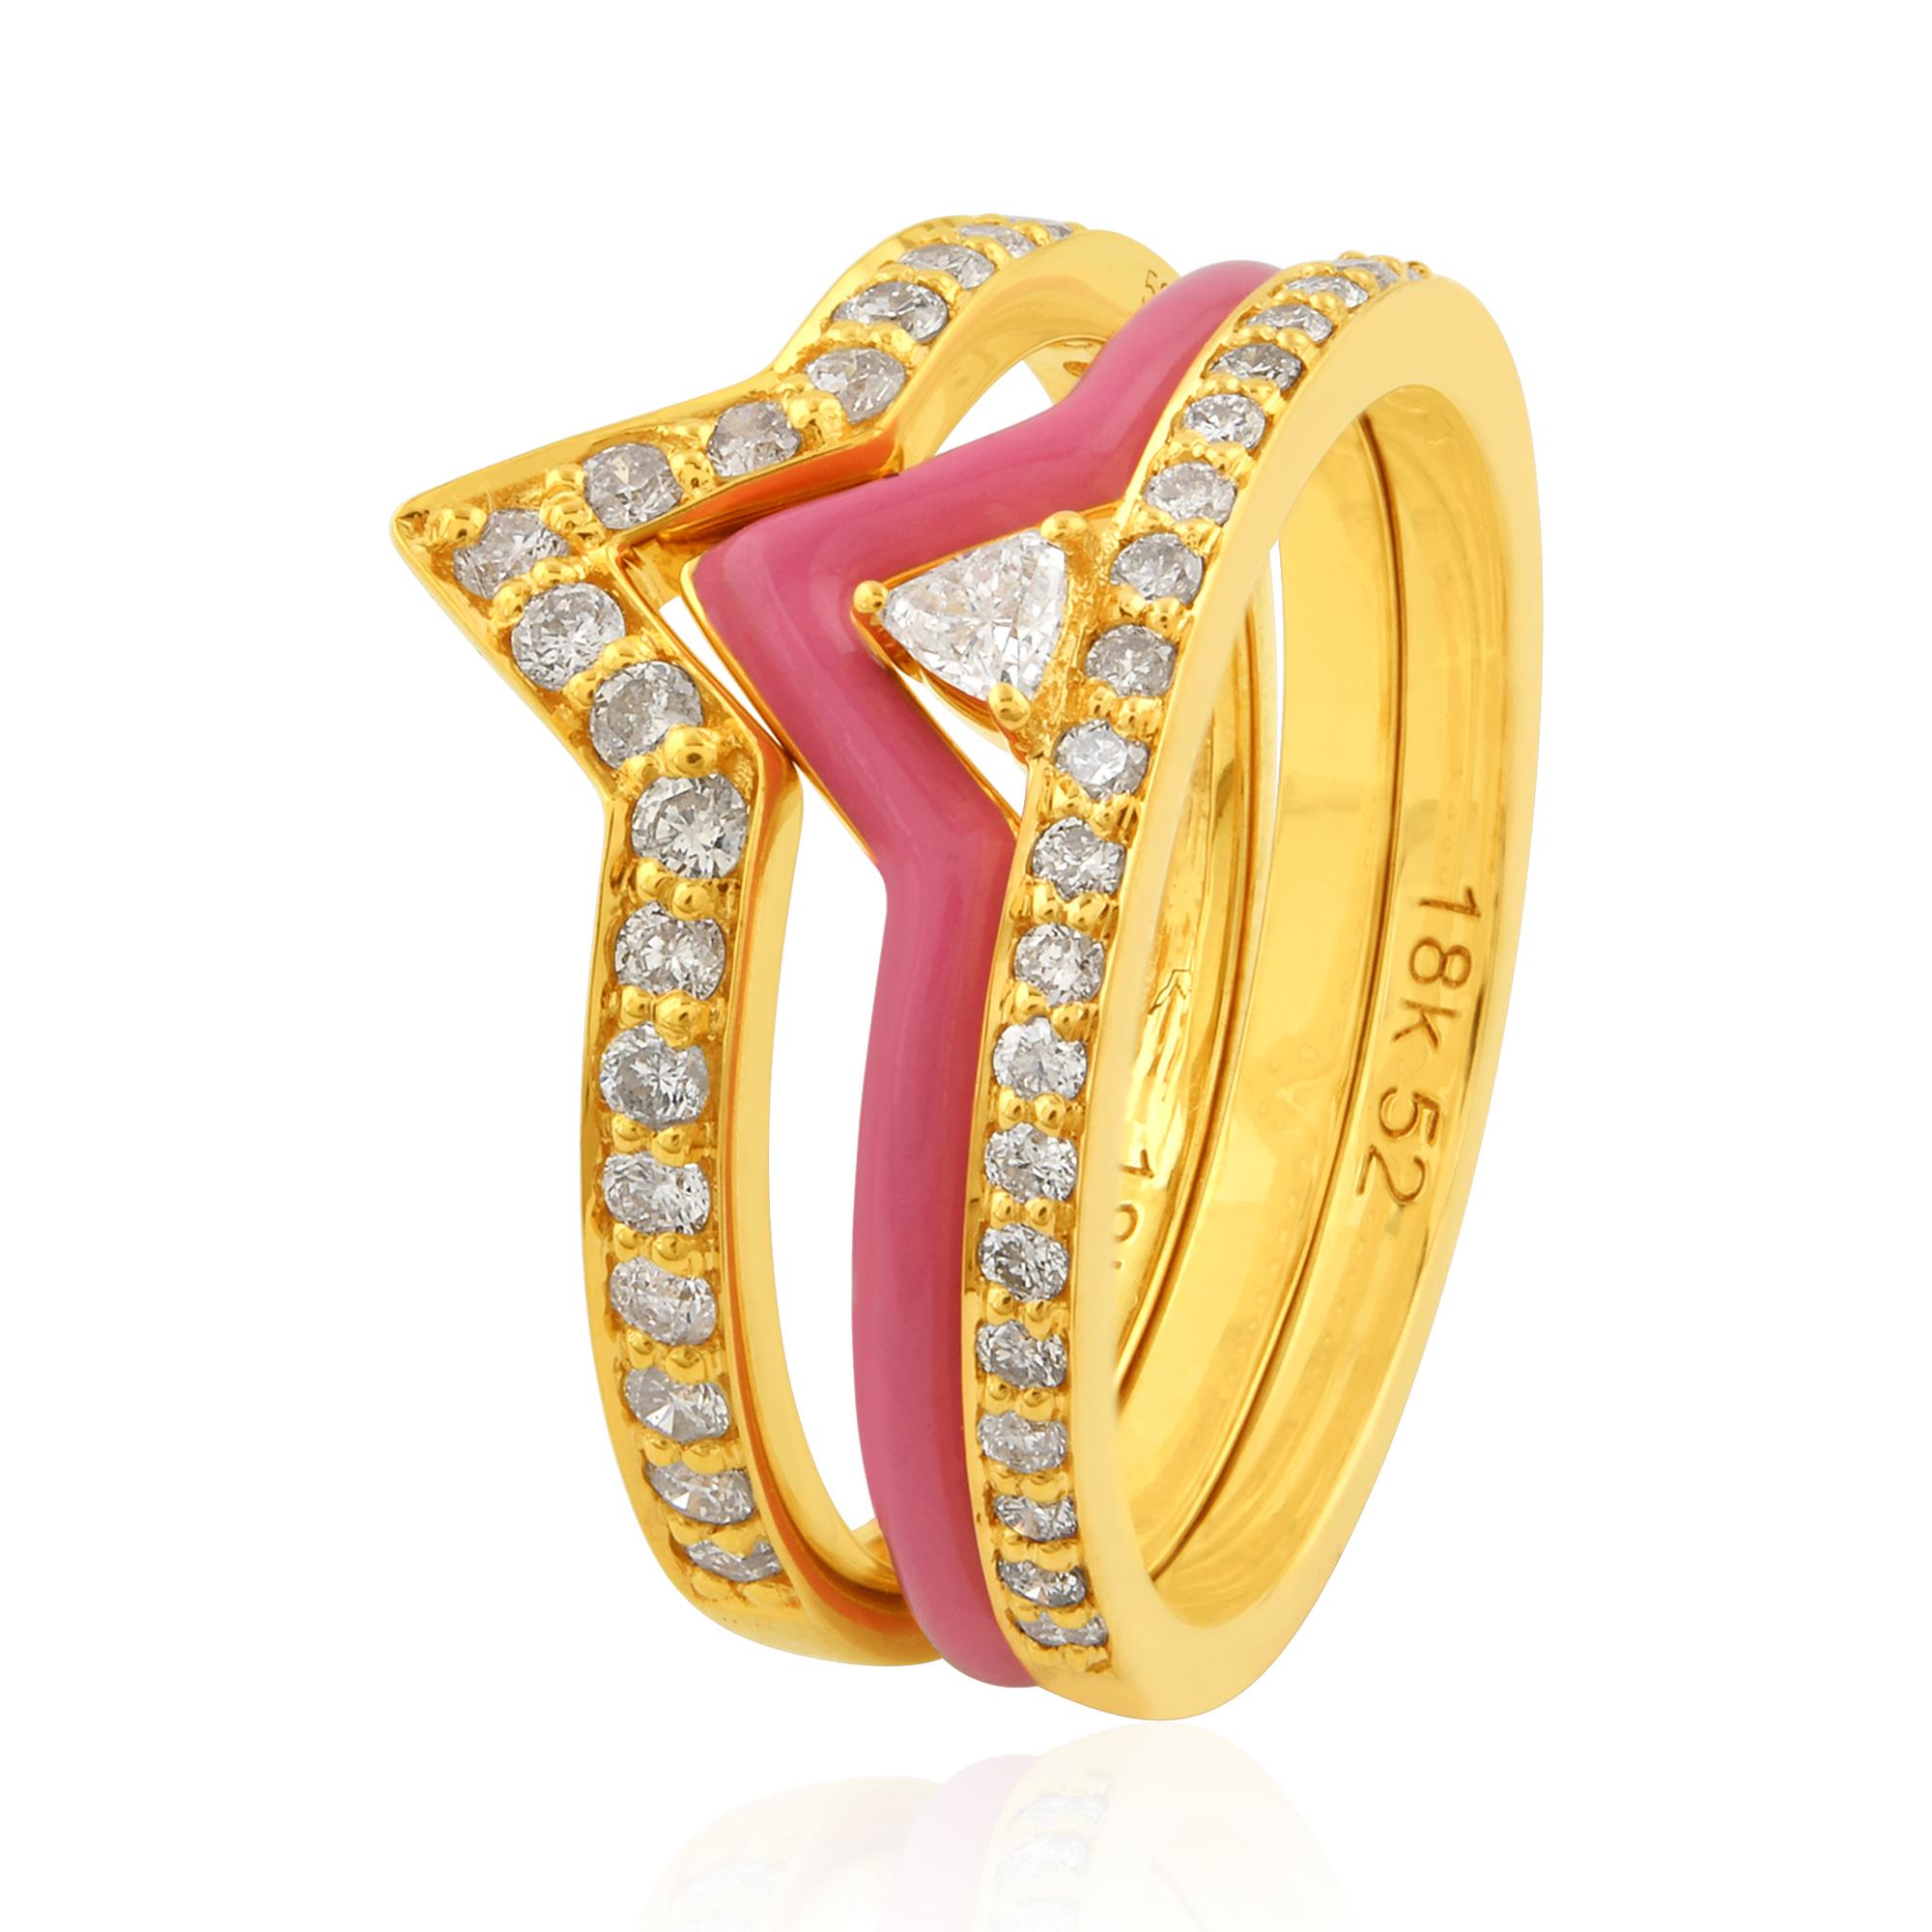 Item Code :- SER-21595A
Gross Weight :- 6.64 gm
18k Yellow Gold Weight :- 6.52 gm
Diamond Weight :- 0.61 carat  ( AVERAGE DIAMOND CLARITY SI1-SI2 & COLOR H-I )
Ring Size :- 7 US & All ring size available
✦ Sizing
.....................
We can adjust